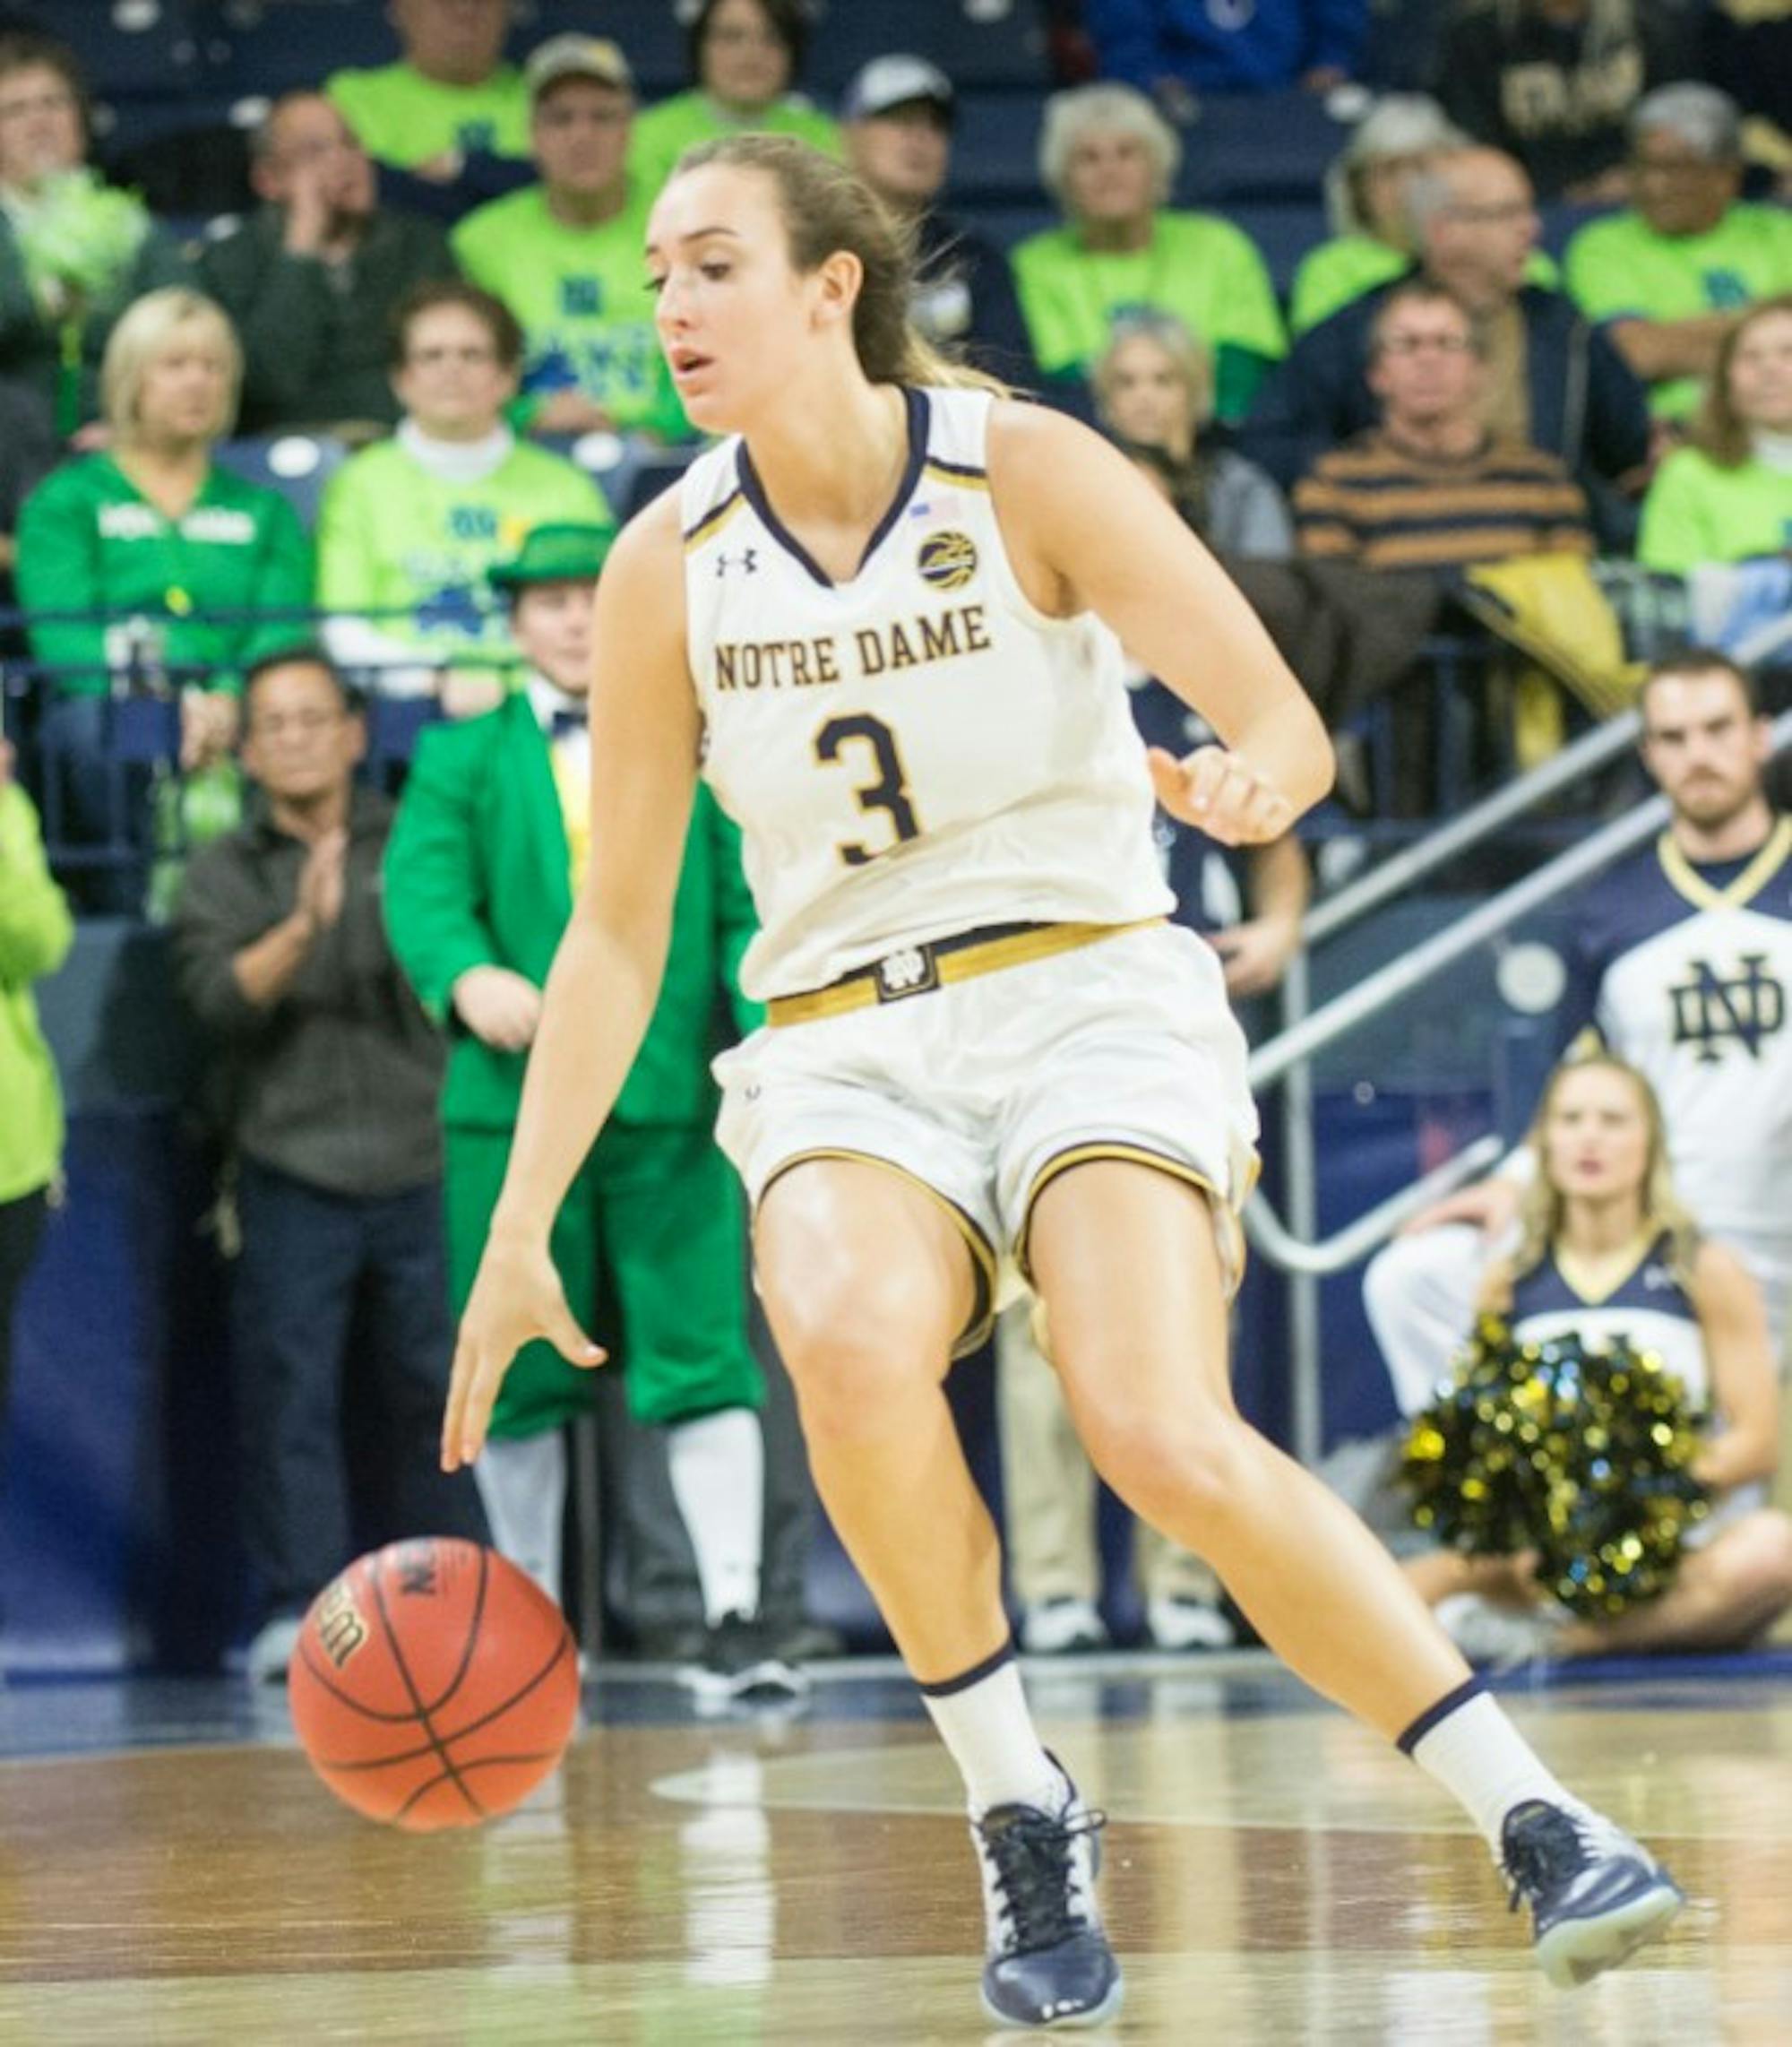 Irish sophomore guard Marina Mabrey dribbles the ball up the court during Notre Dame's 71-60 win over Washington on Nov. 20 at Purcell Pavilion.